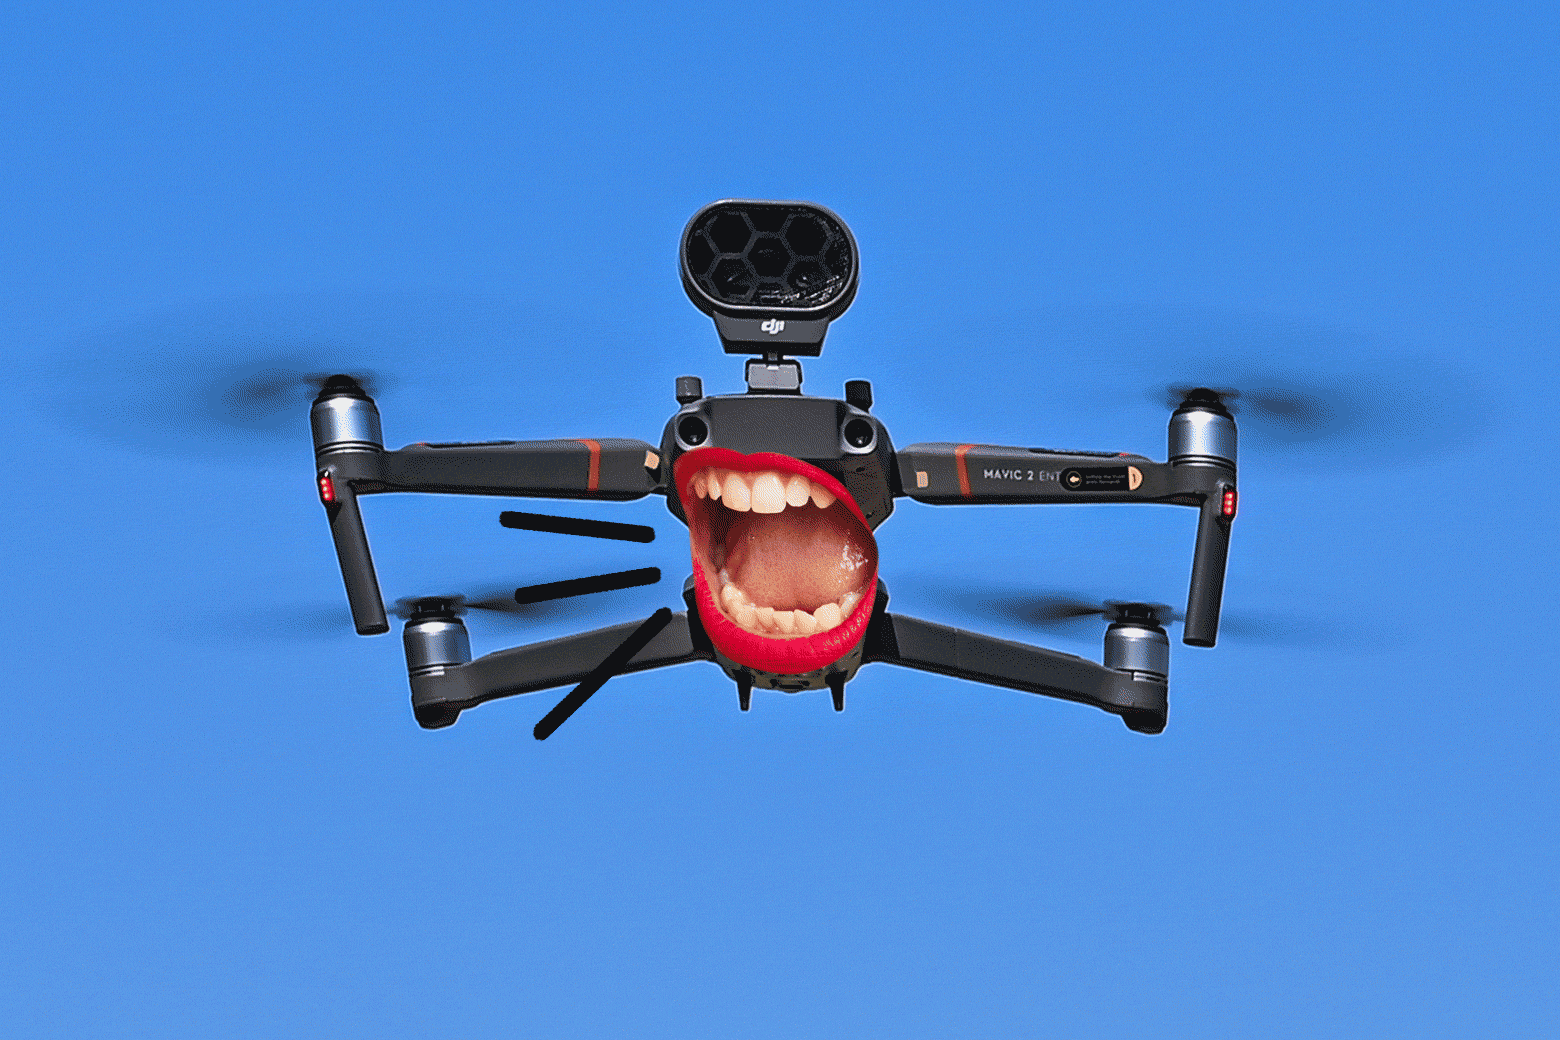 An open red mouth toggles side to side in front of a drone in the sky.